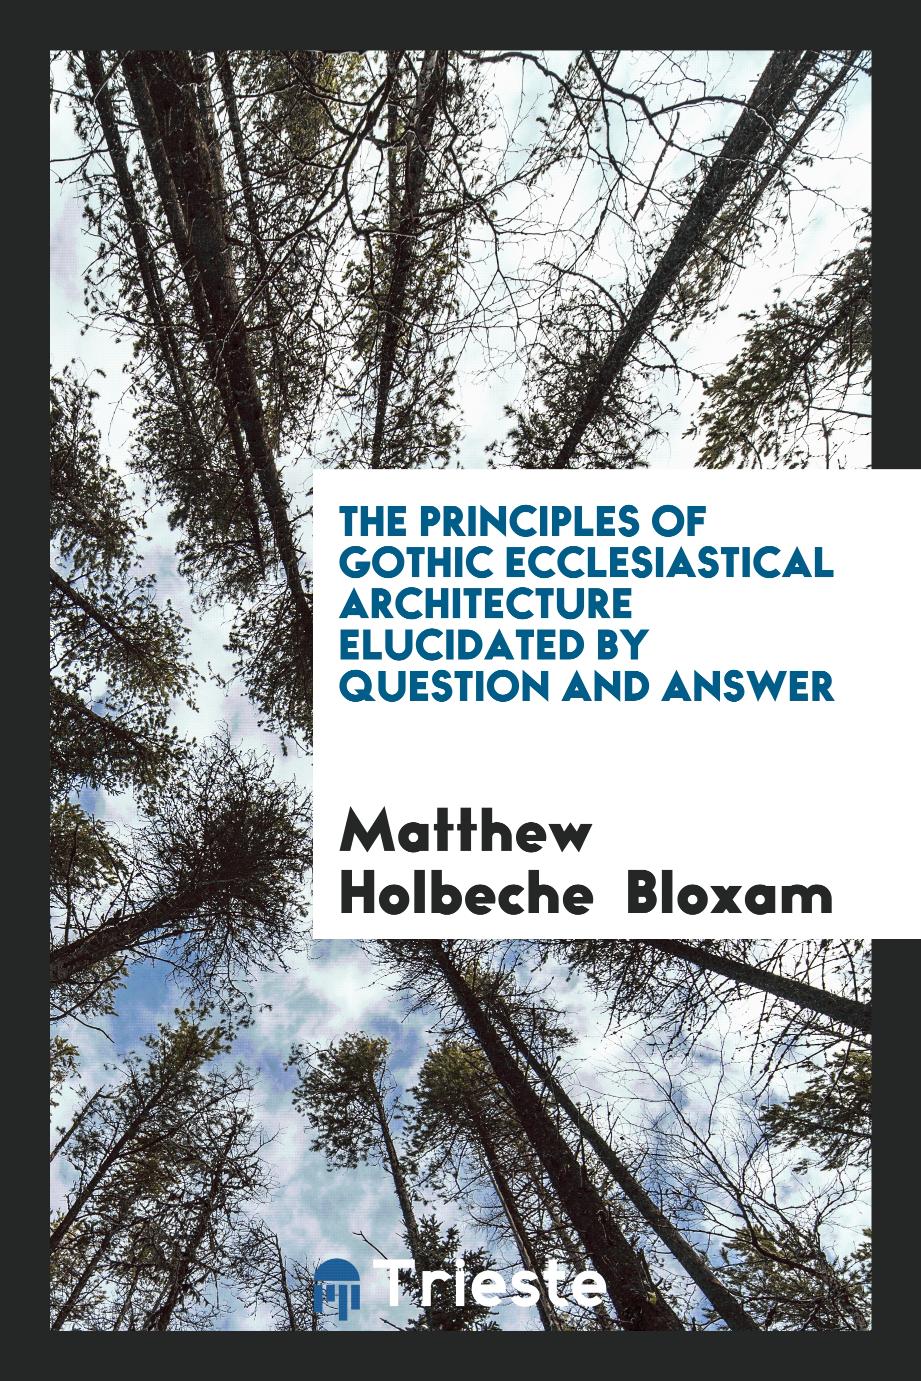 The Principles of Gothic Ecclesiastical Architecture Elucidated by Question and Answer